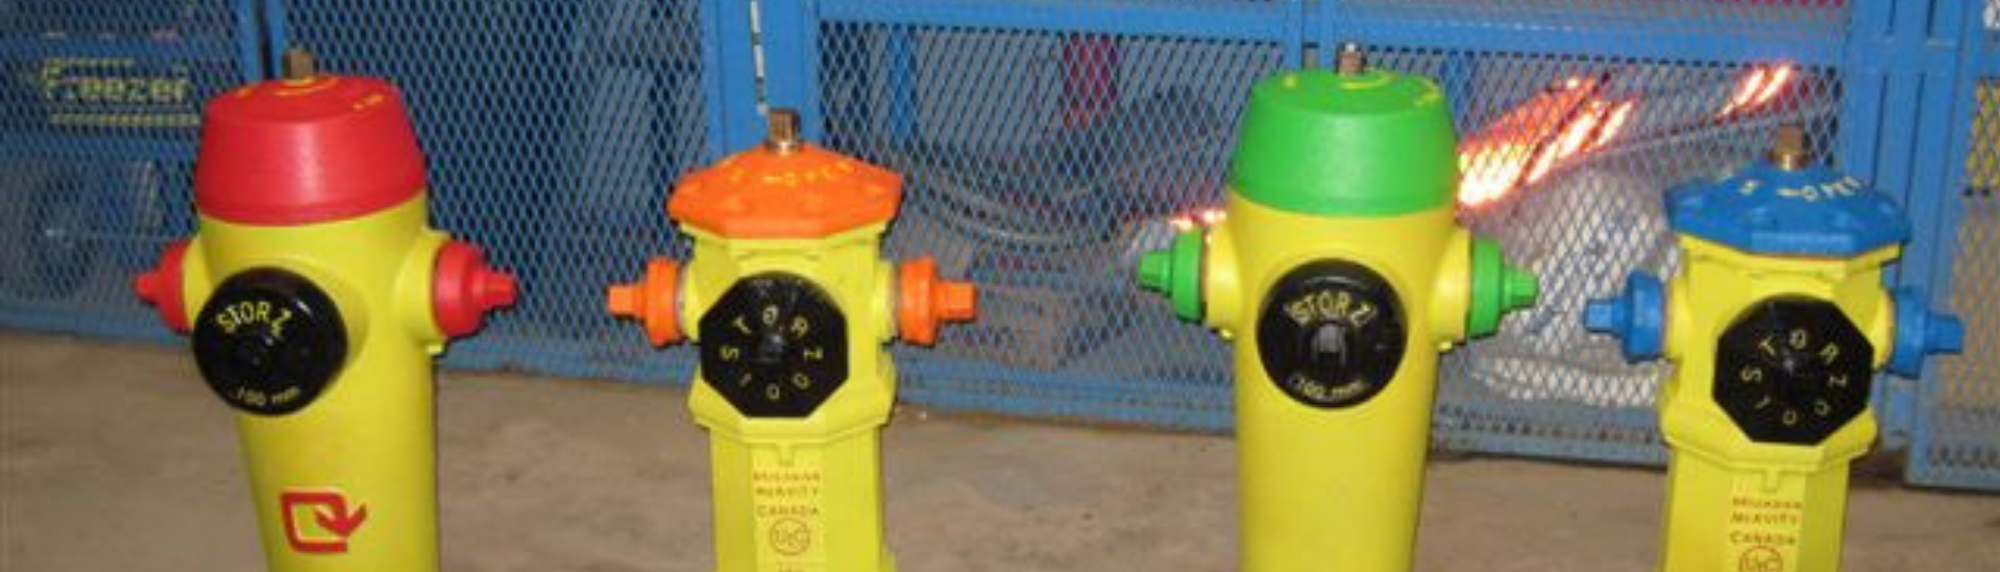 Fire hydrant inspection and flow rating